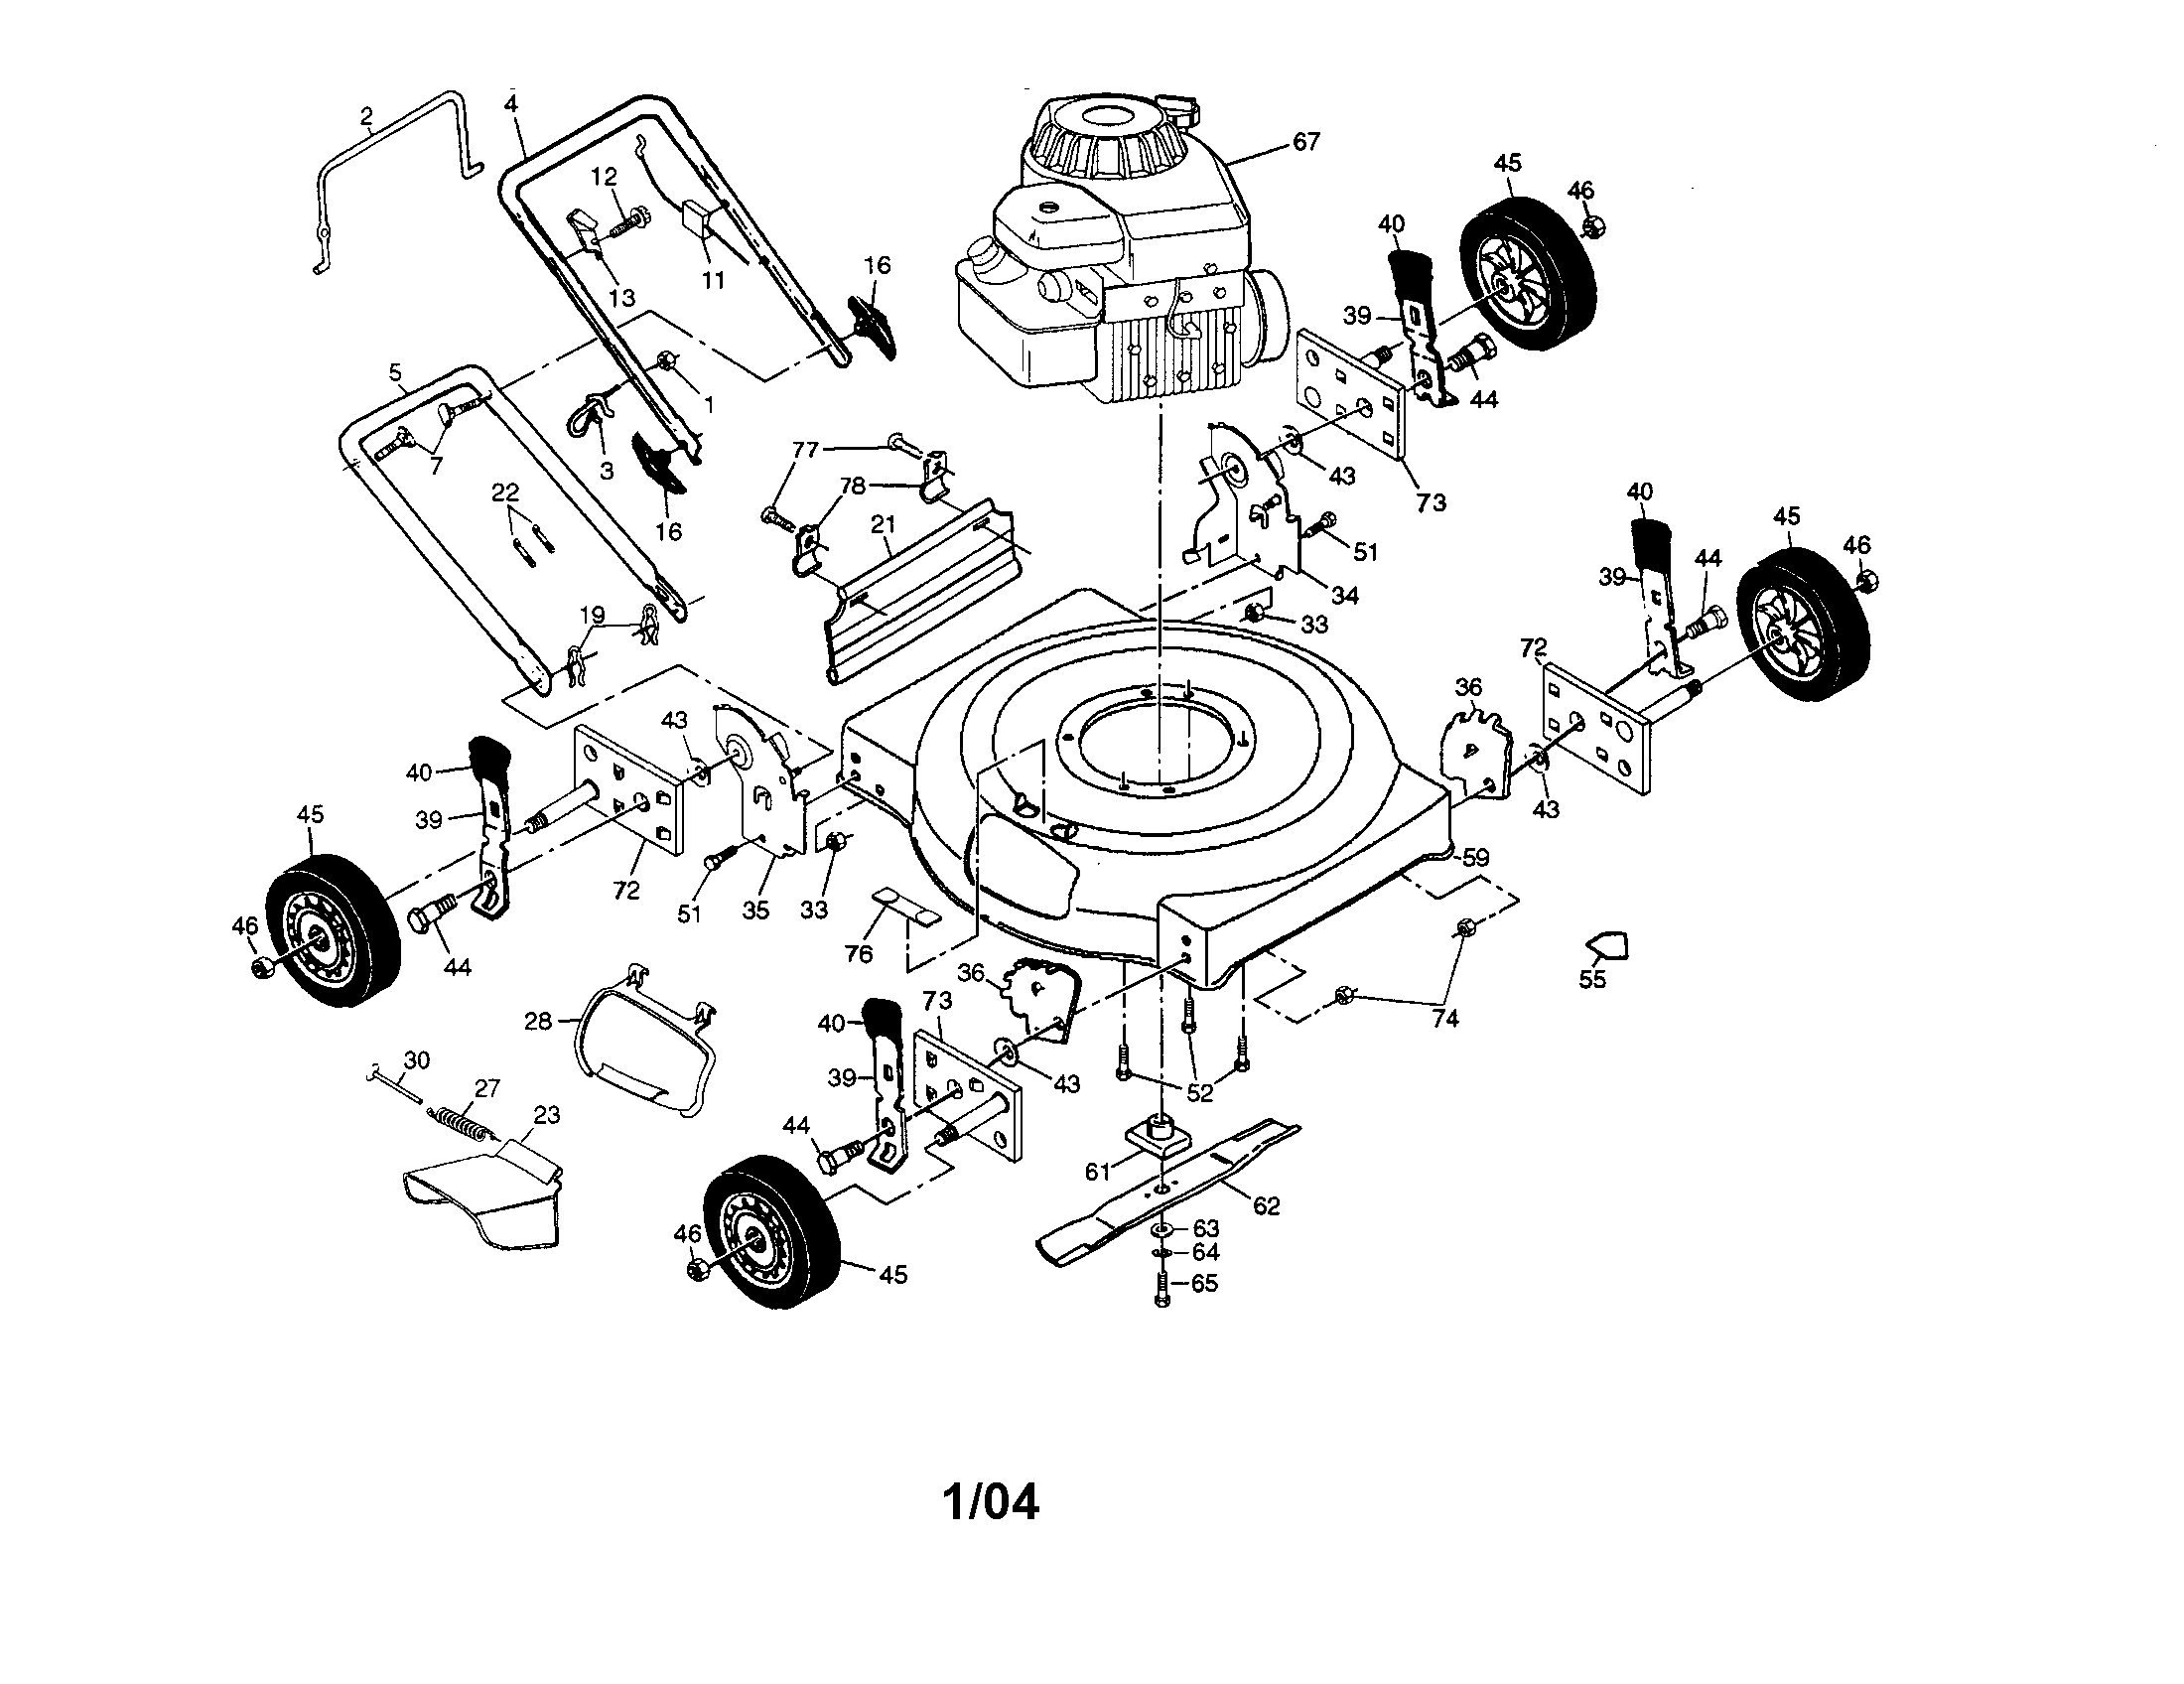 Weed Eater Lawn Mower Parts Diagram Drivenhelios